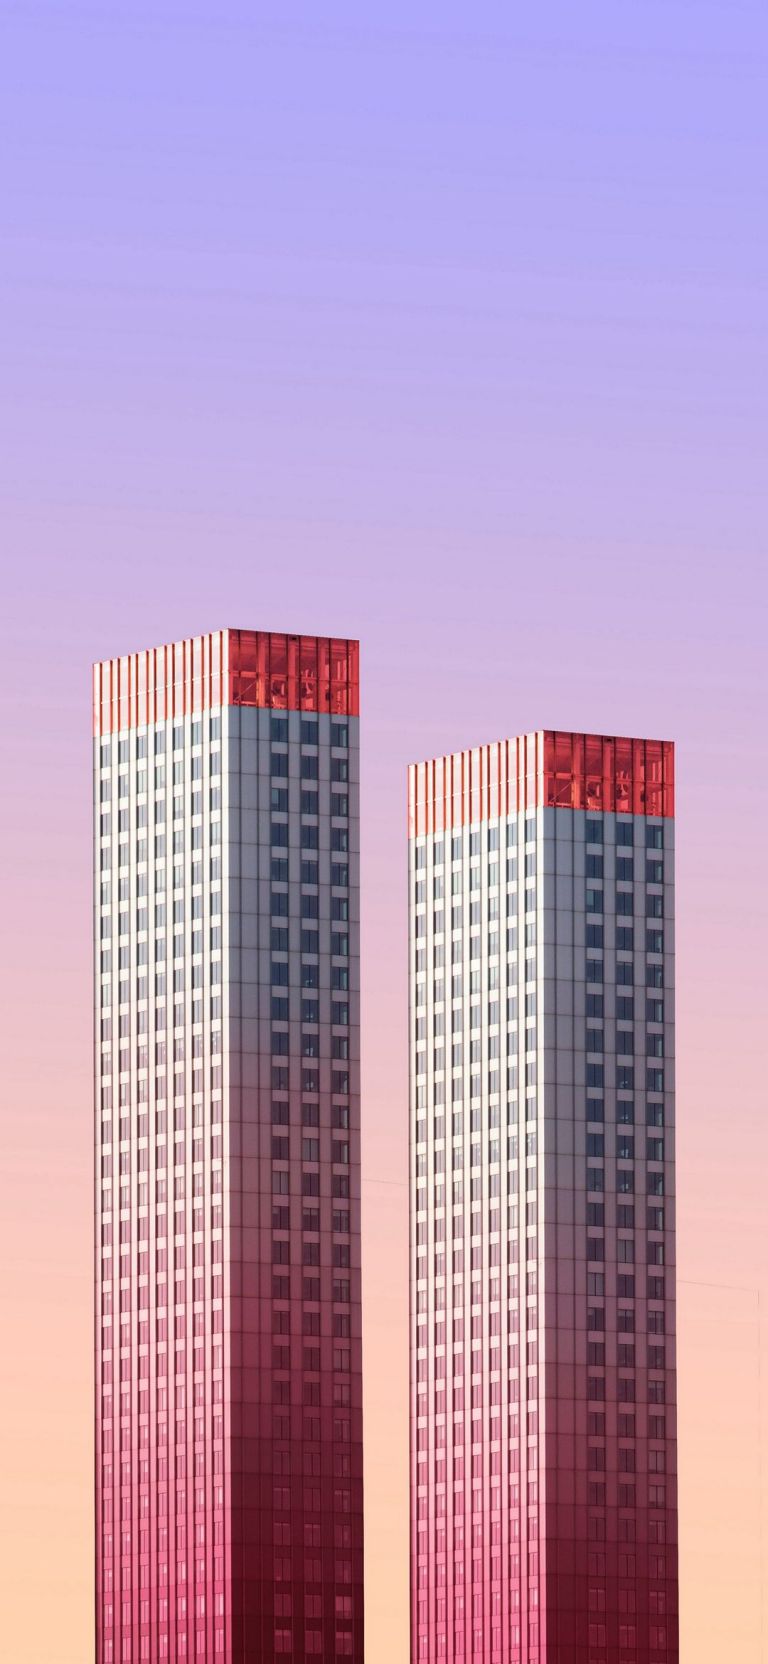 Tall Buildings Architecture Pink Sky Android Amazing 4K Wallpaper